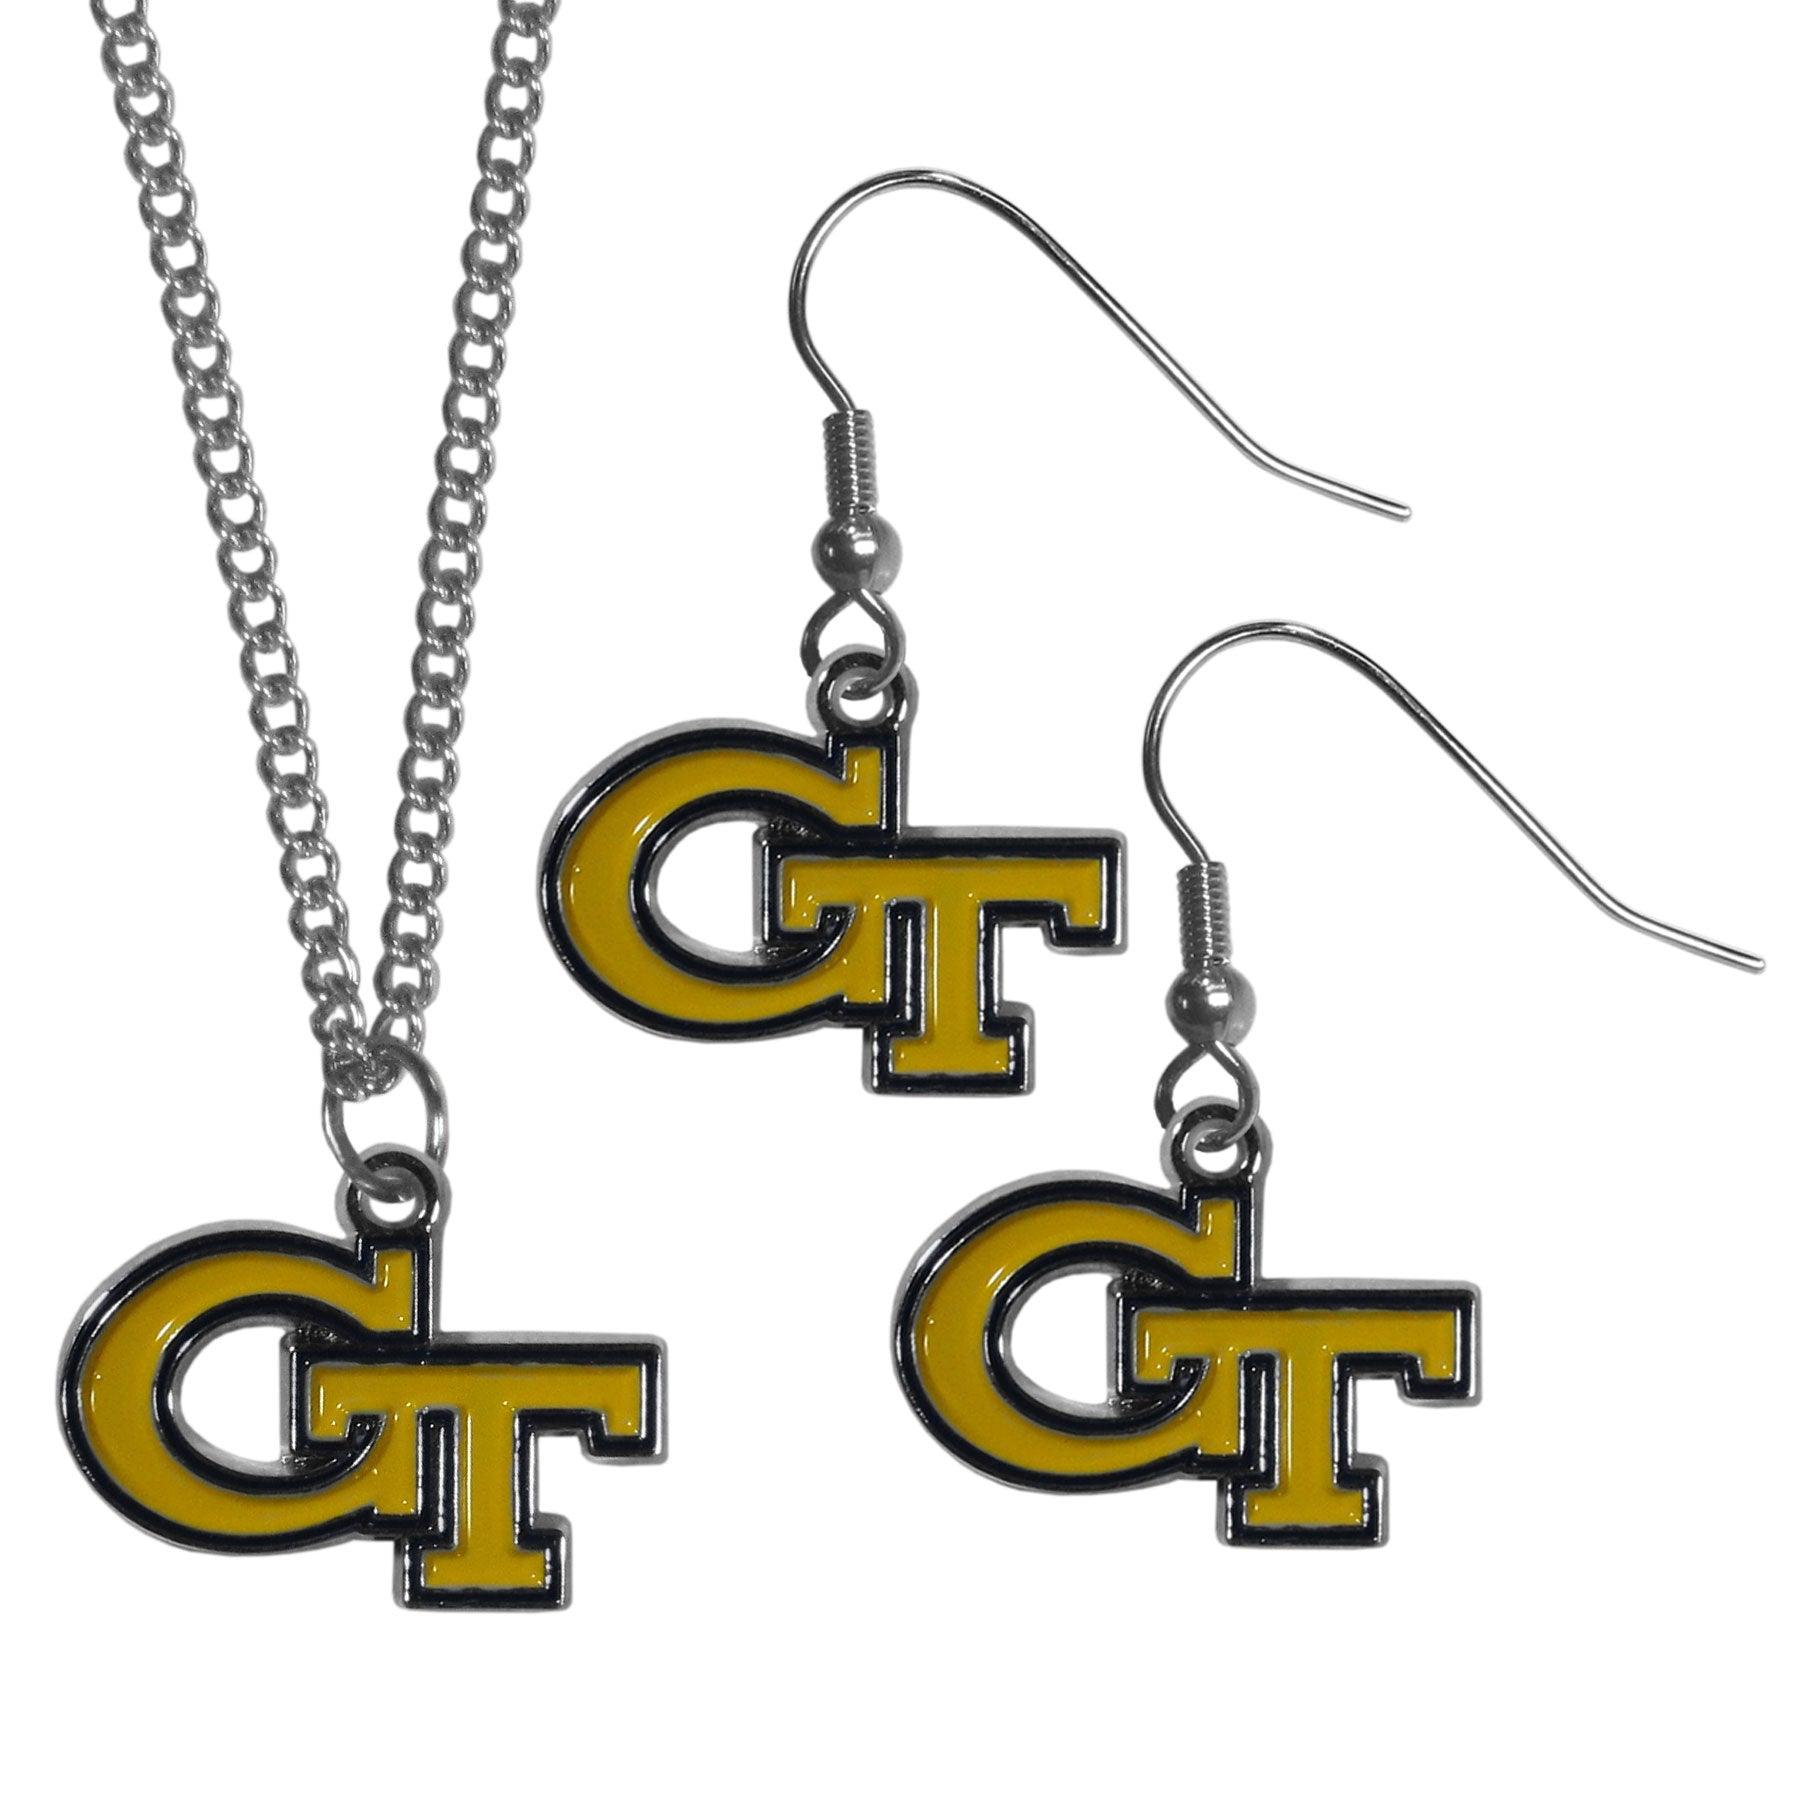 Georgia Tech Yellow Jackets Dangle Earrings and Chain Necklace Set - Flyclothing LLC